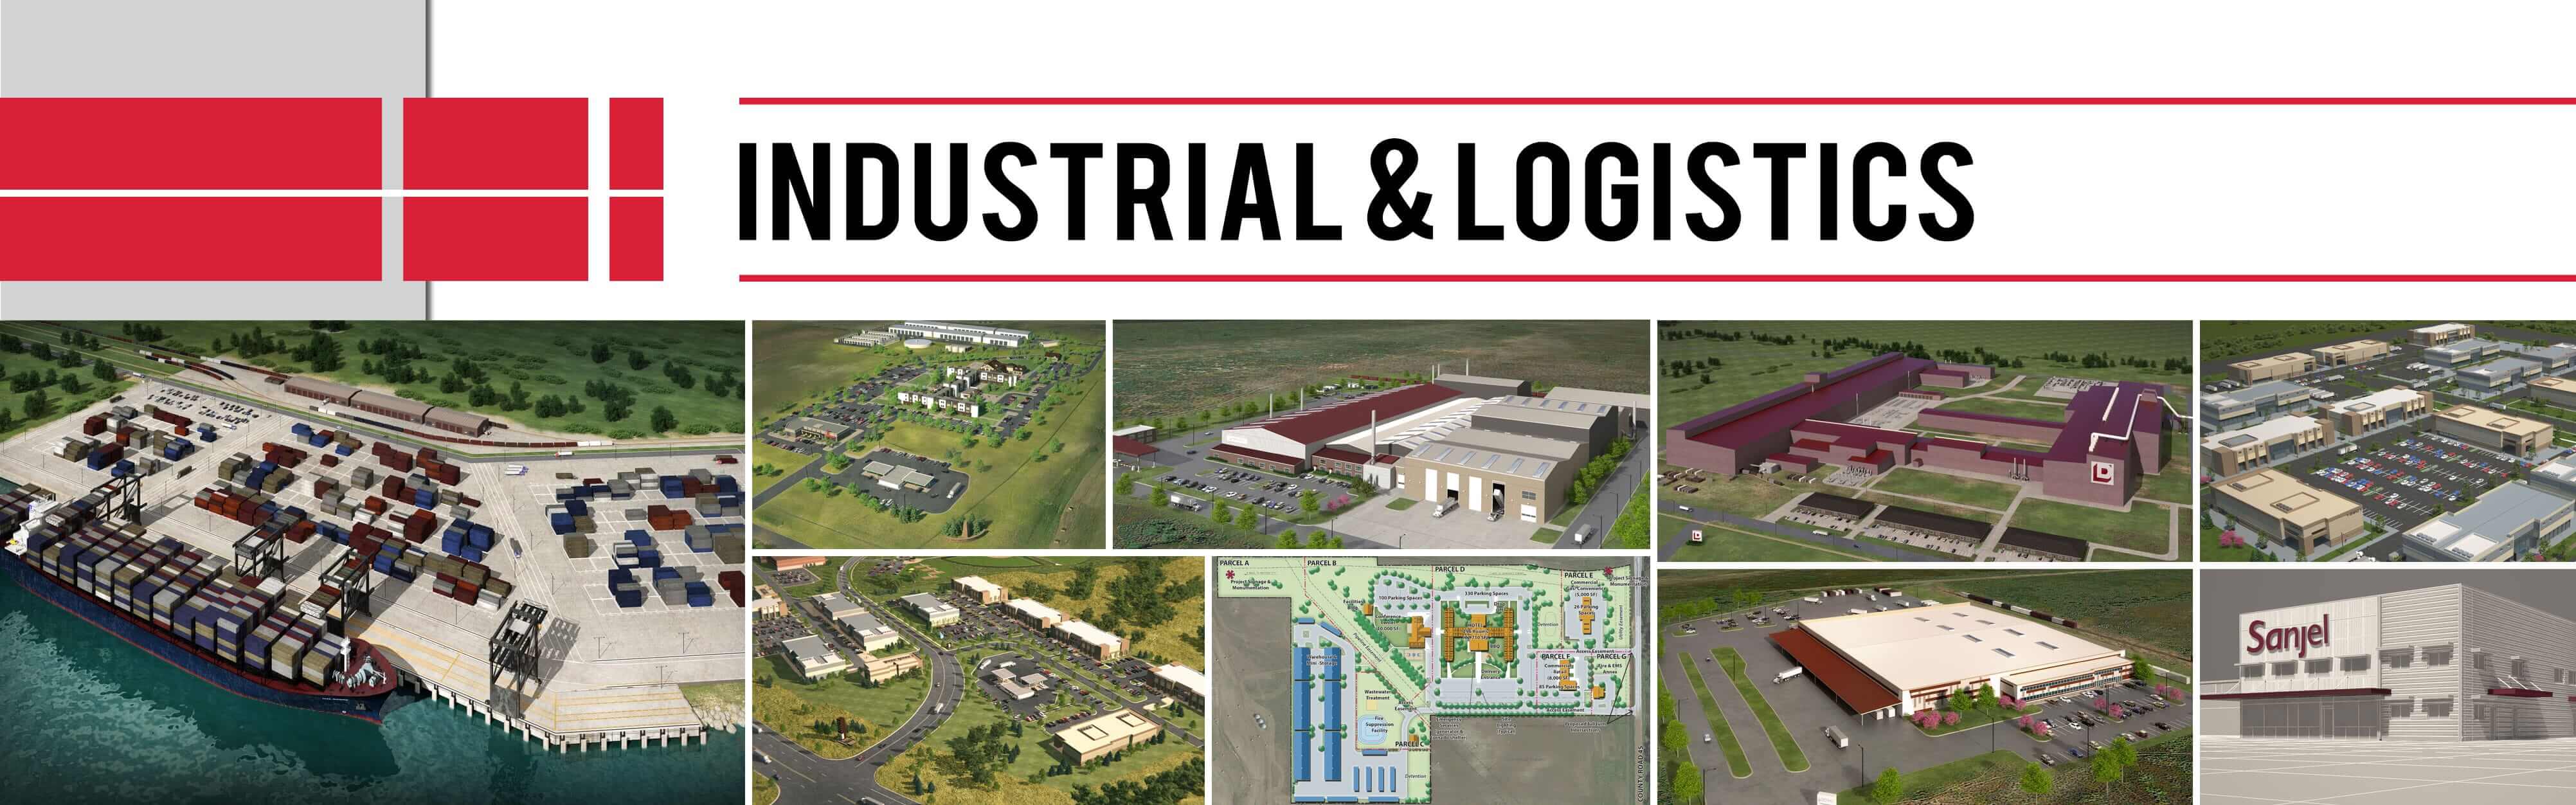 Architects that specialize in Industrial architecture